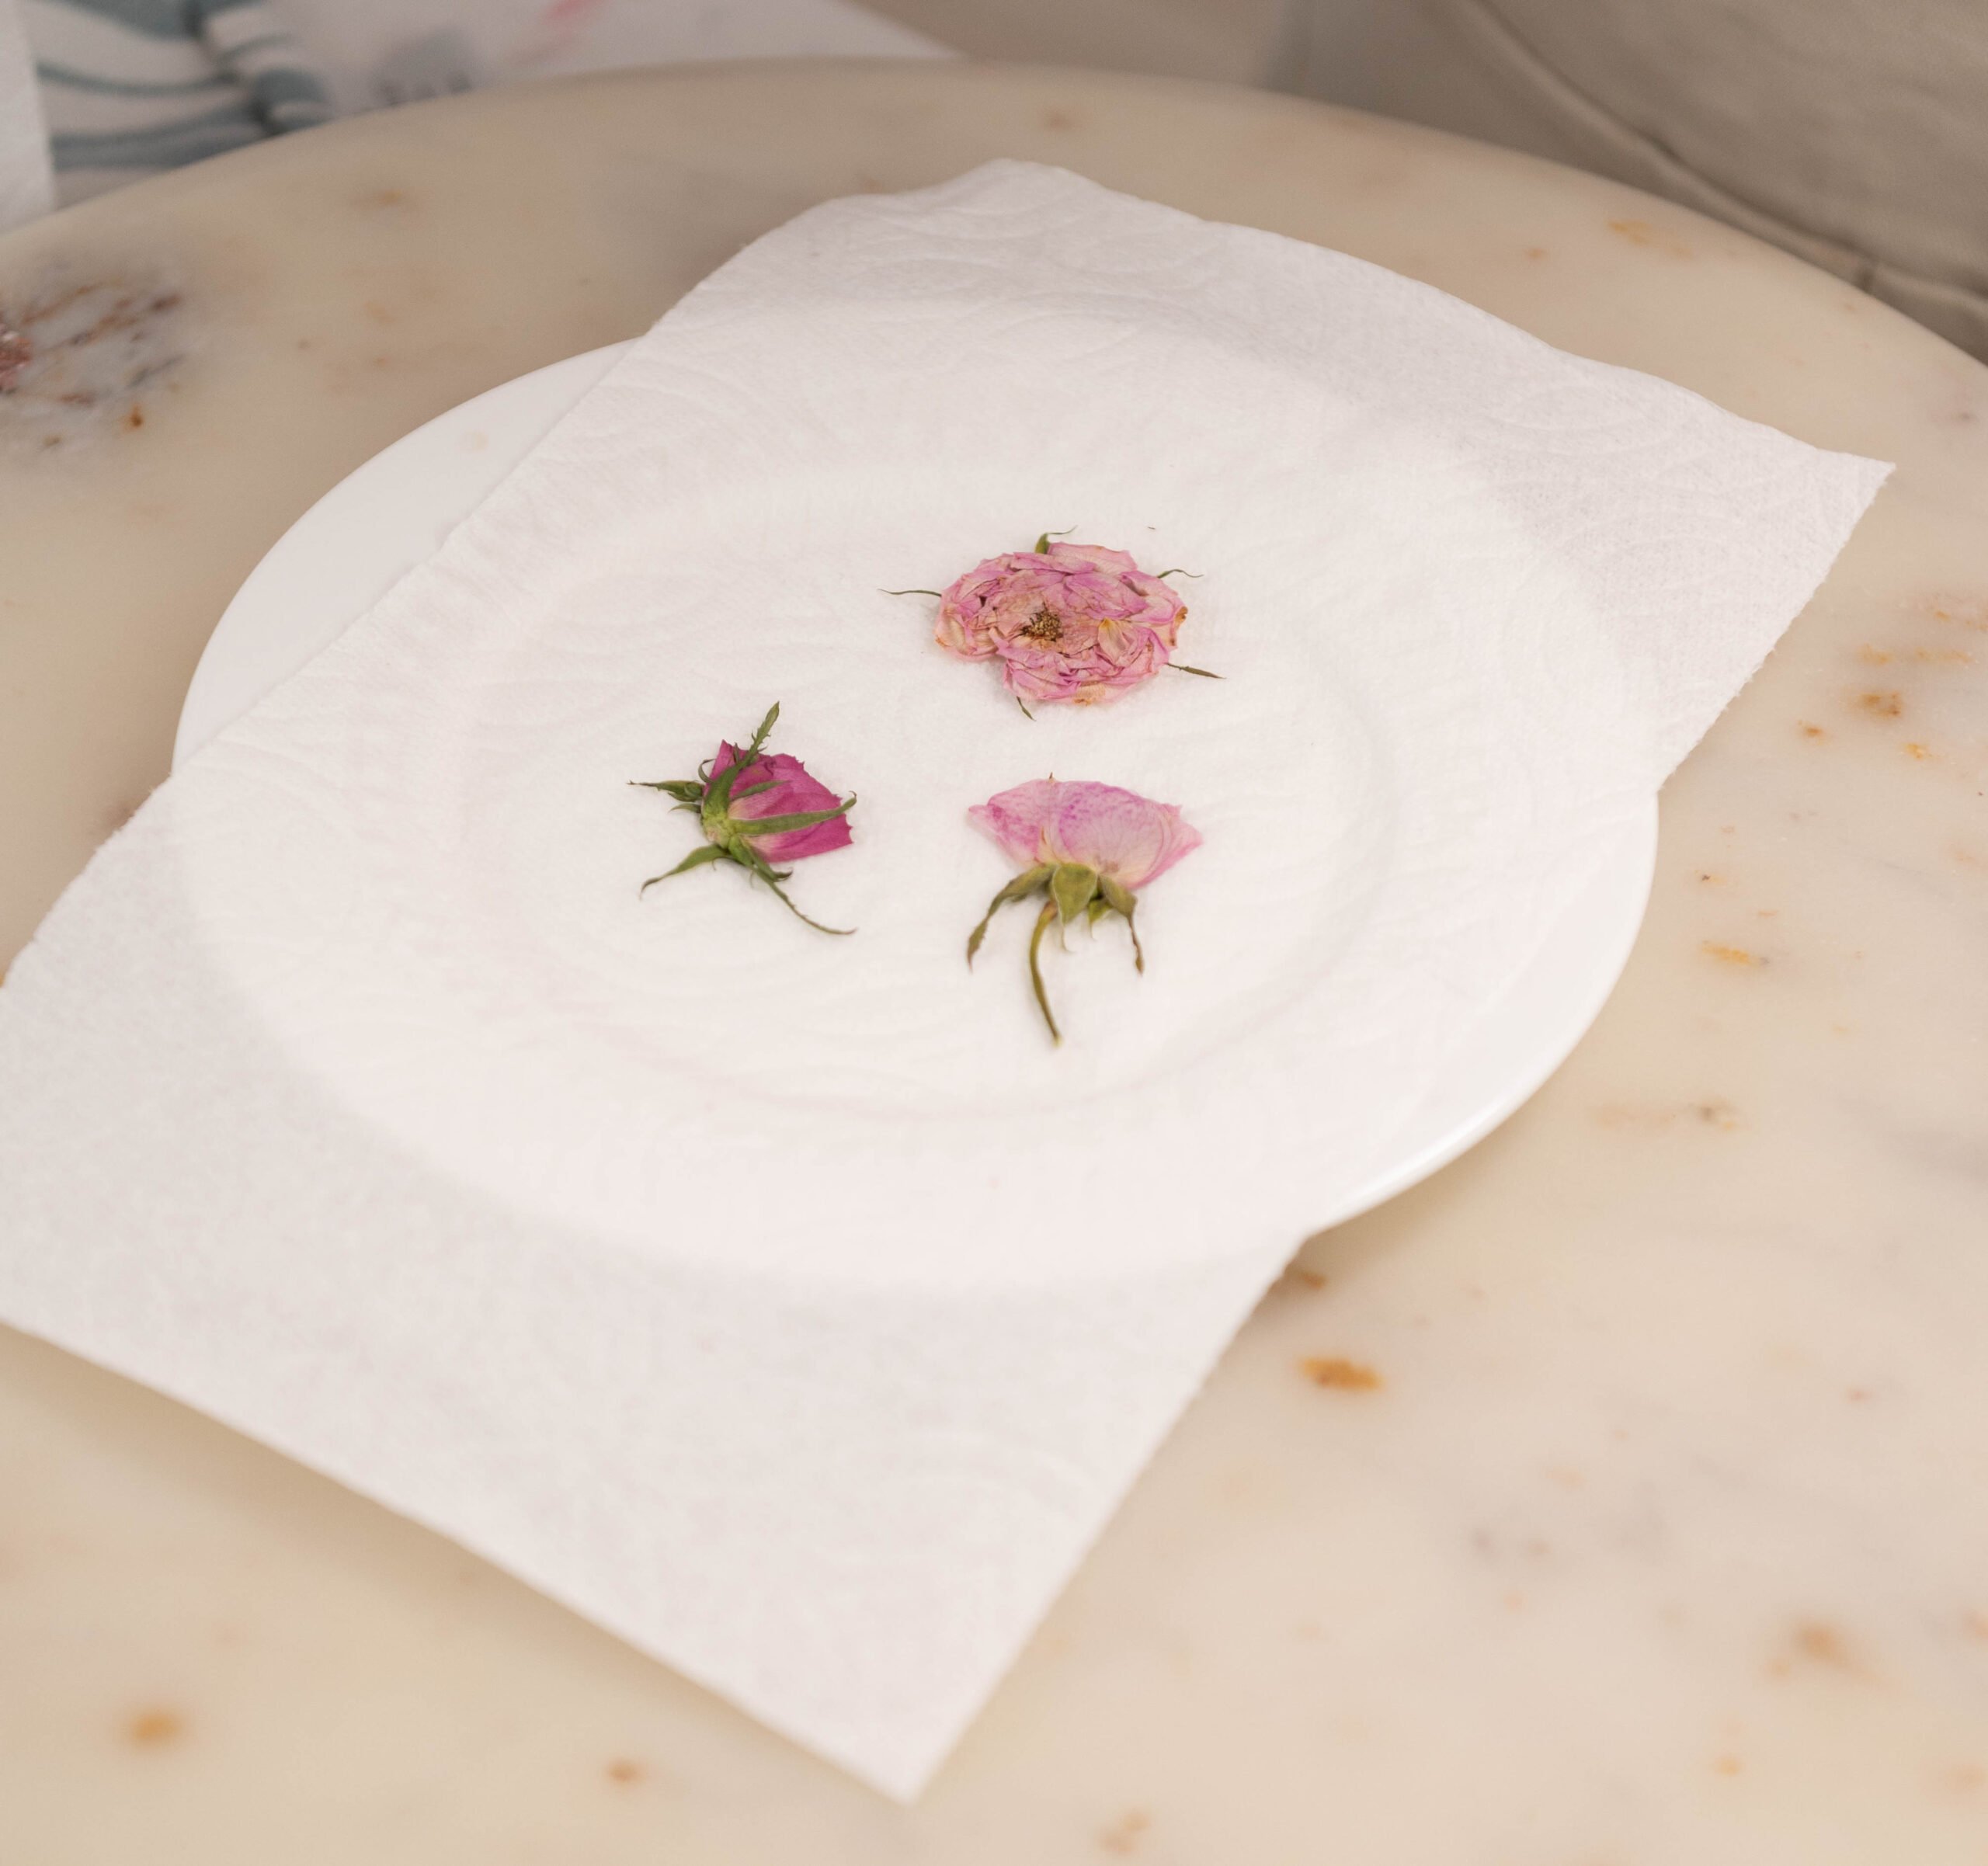 pressed flowers on a plate